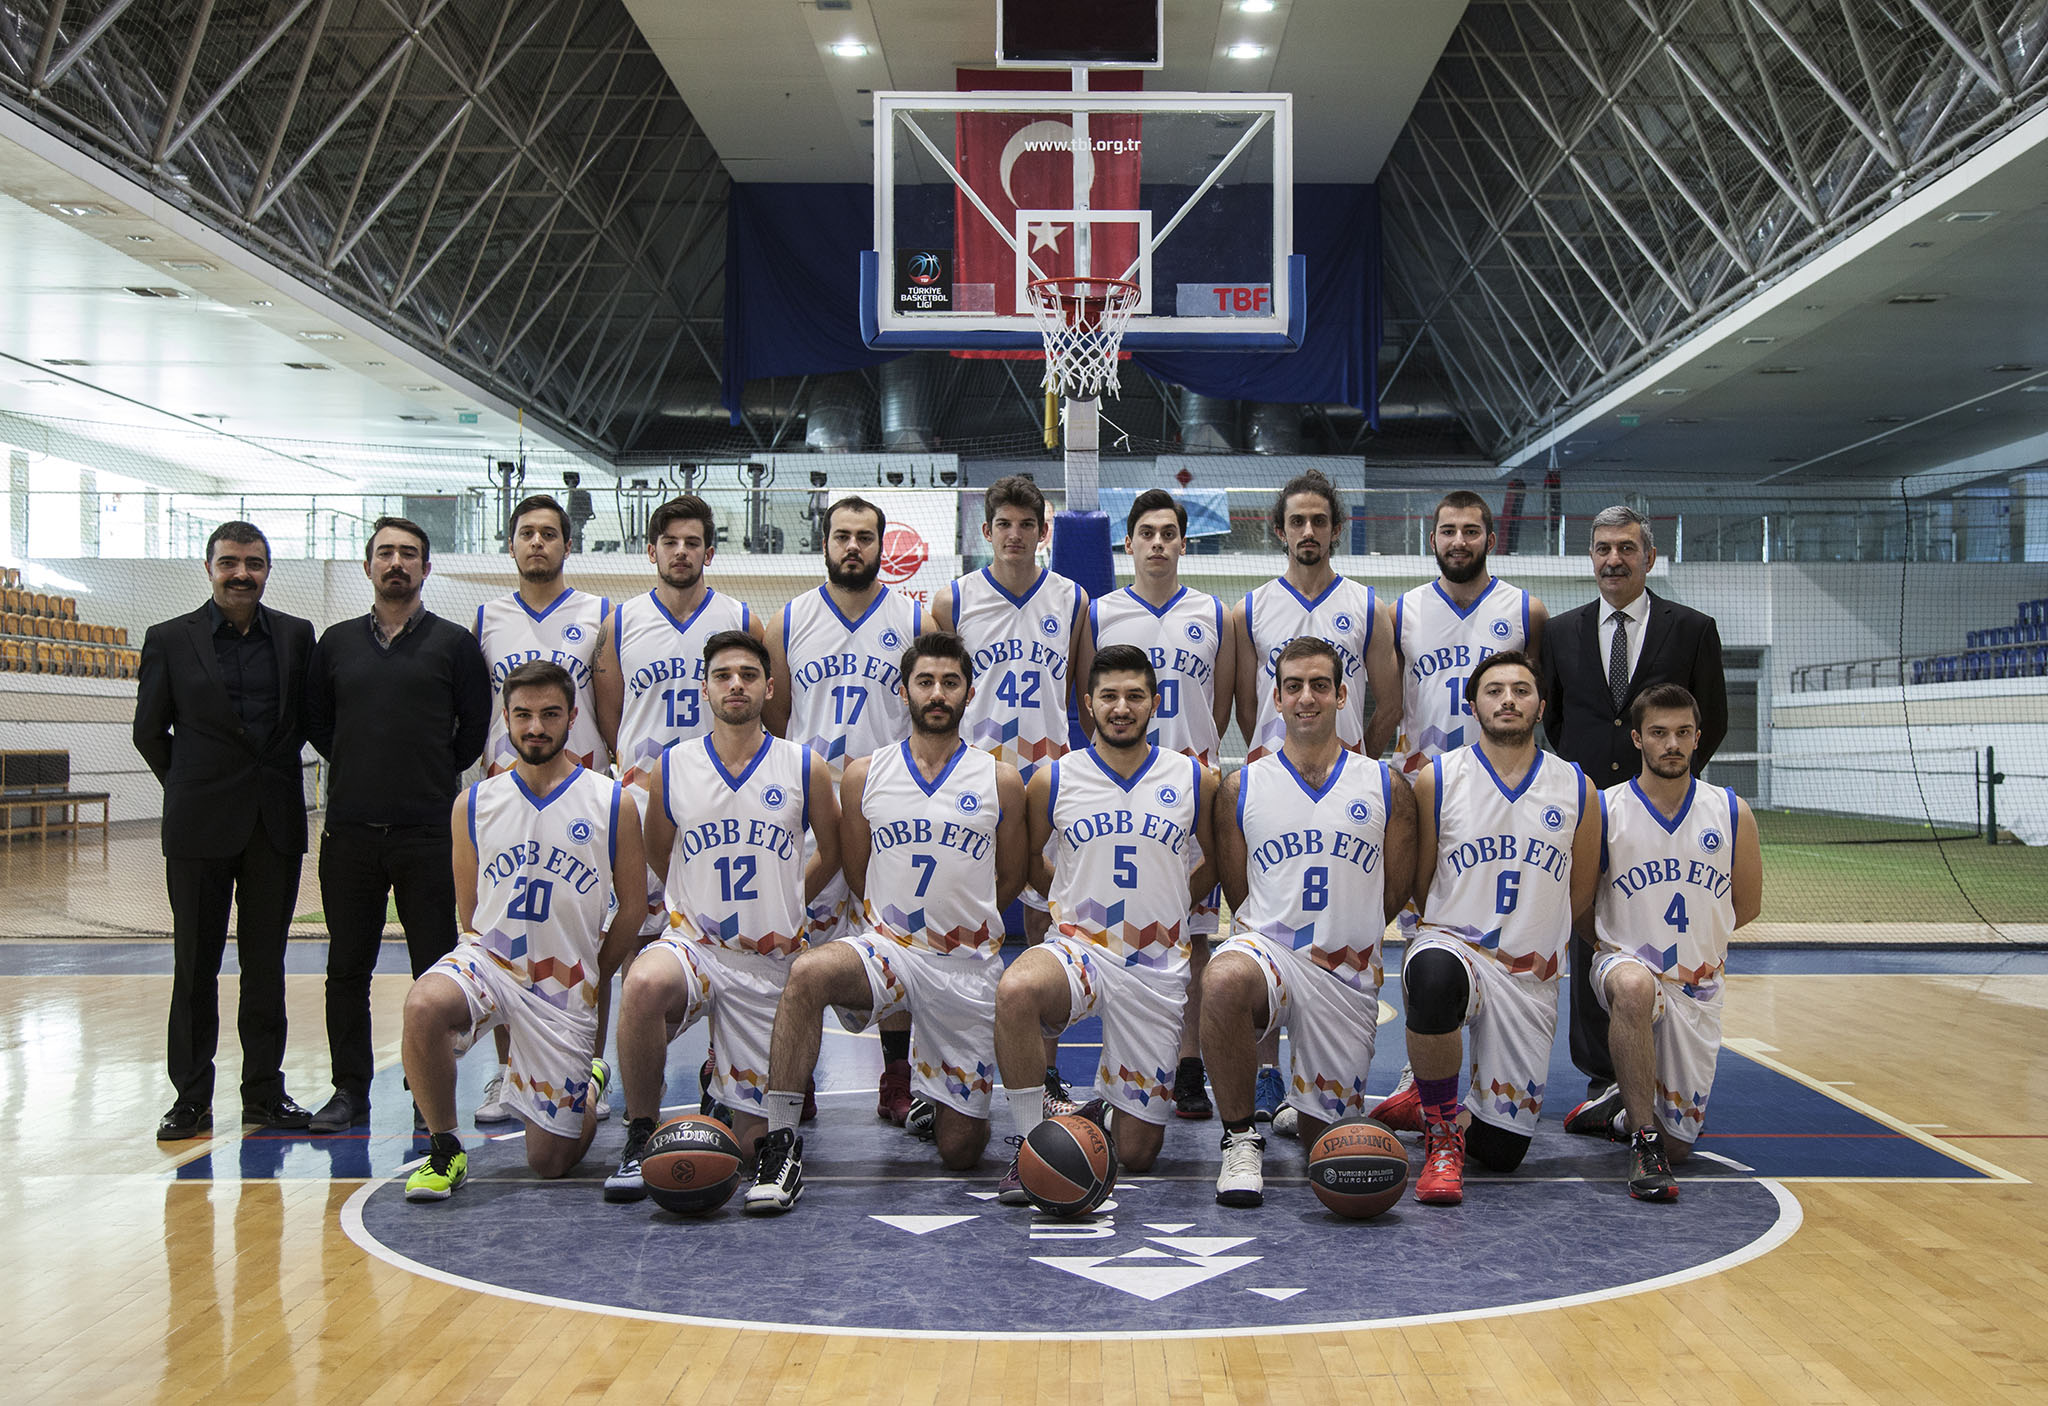 Gazete ETÜ Had an Enjoyable Interview With TOBB ETÜ Men’s Basketball Team Which Will Play Its First Game On The Second Round of UNİLİG